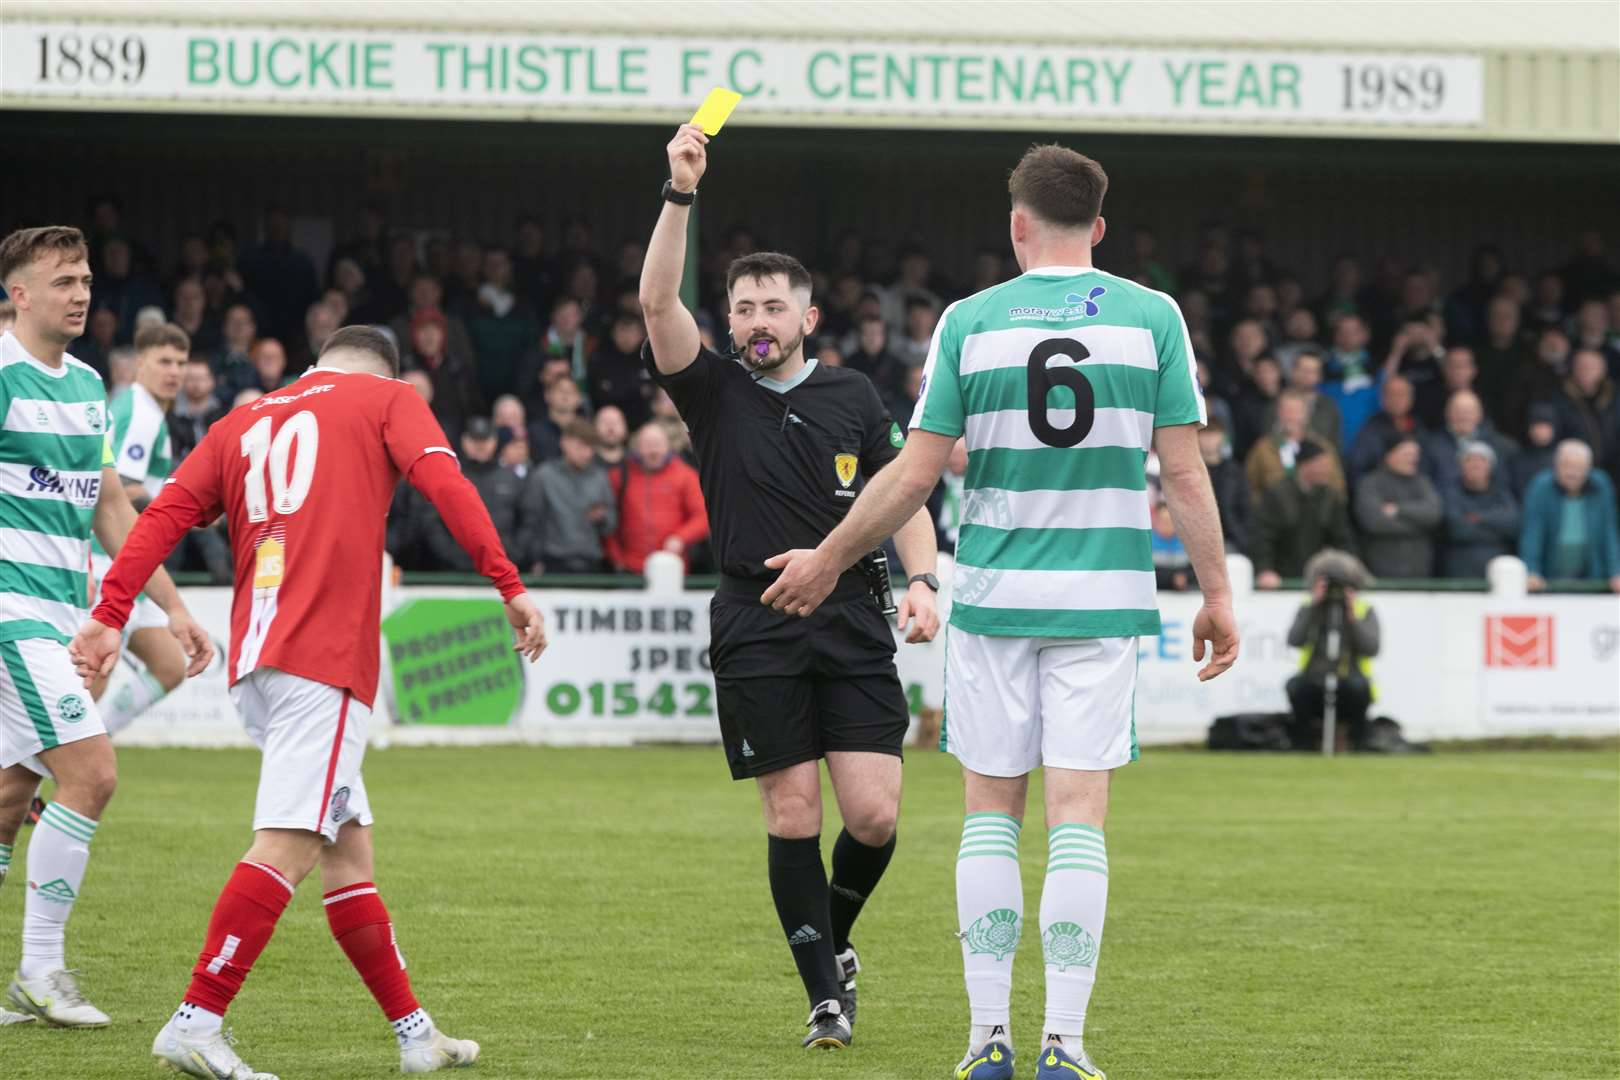 Referee Harry Bruce giving Buckie's Jack Murray a yellow card...Buckie Thistle F.C. v Brechin City F.C. Highland League Final at Victoria Park. ..Picture: Beth Taylor.